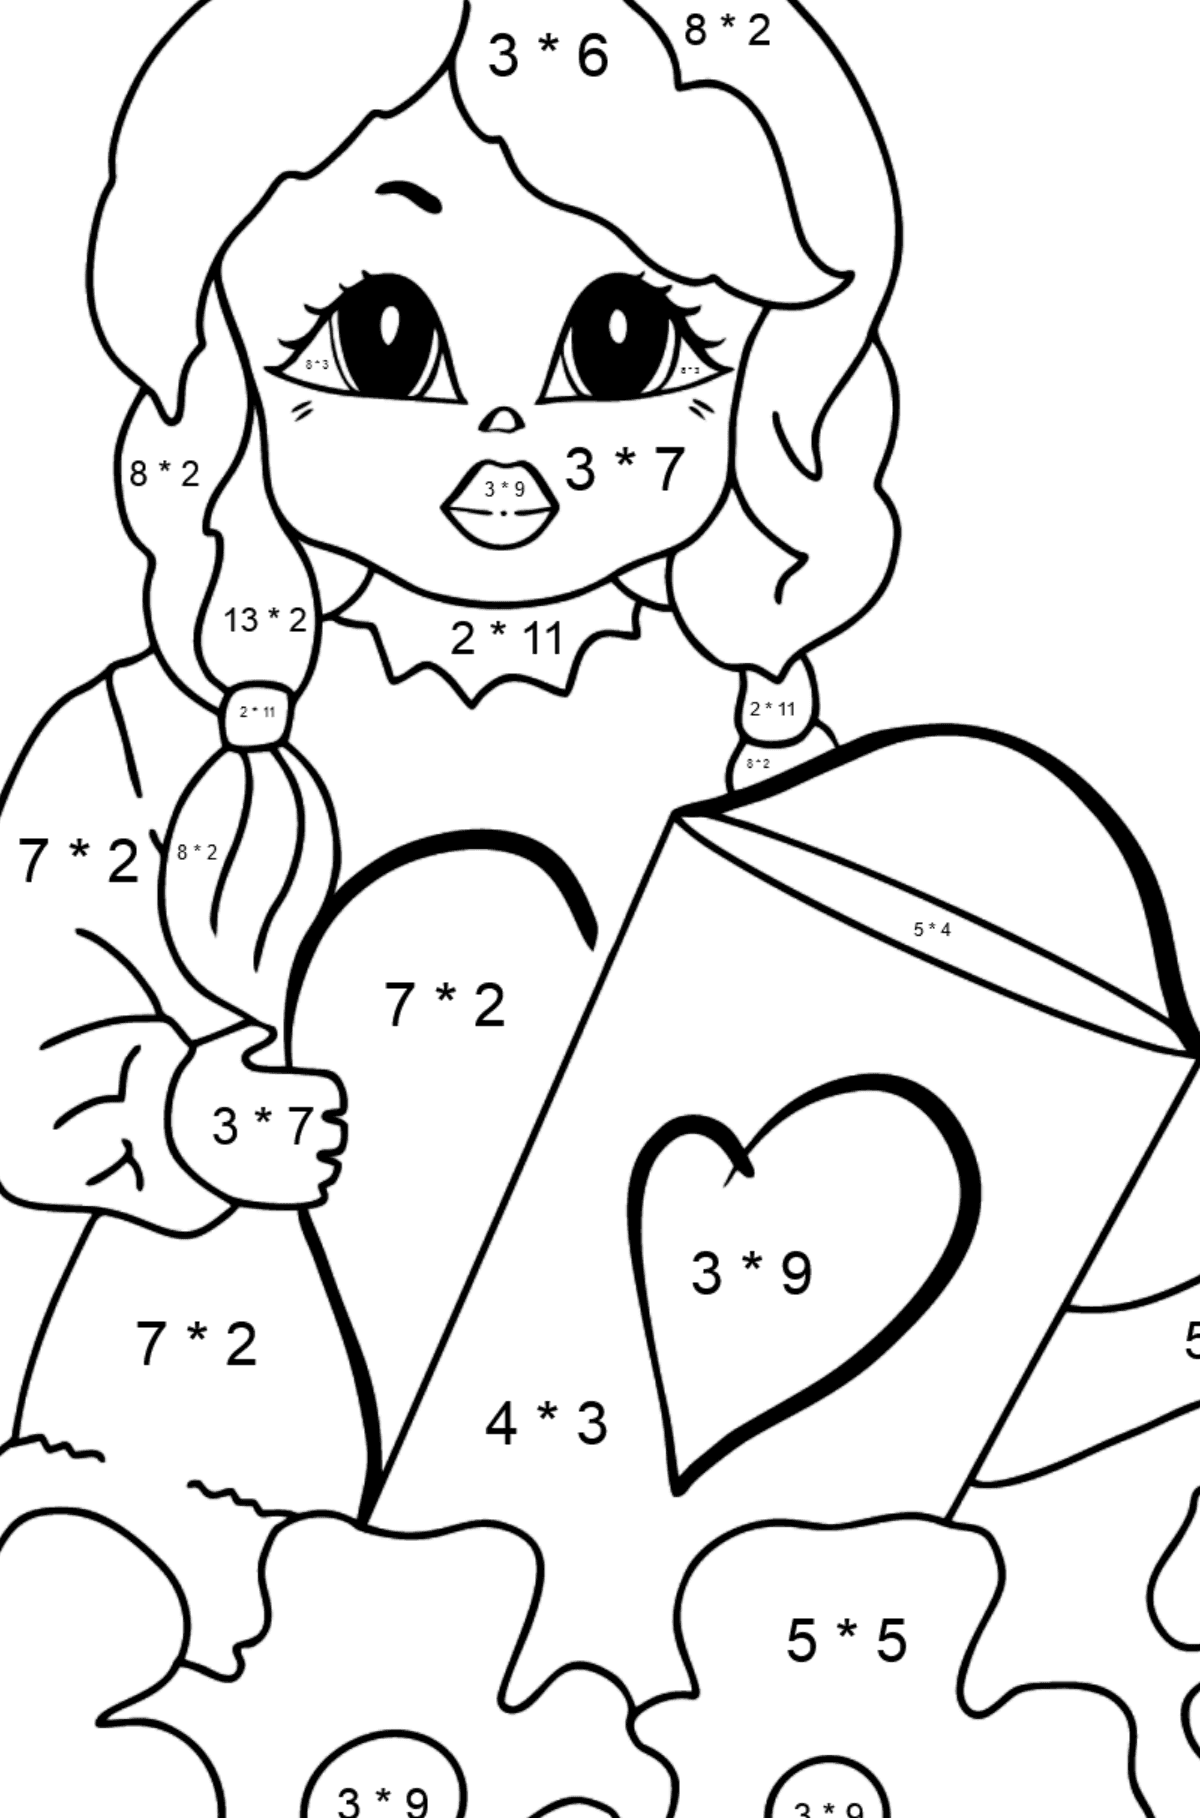 Coloring Page - A Princess with a Watering Can - Math Coloring - Multiplication for Kids